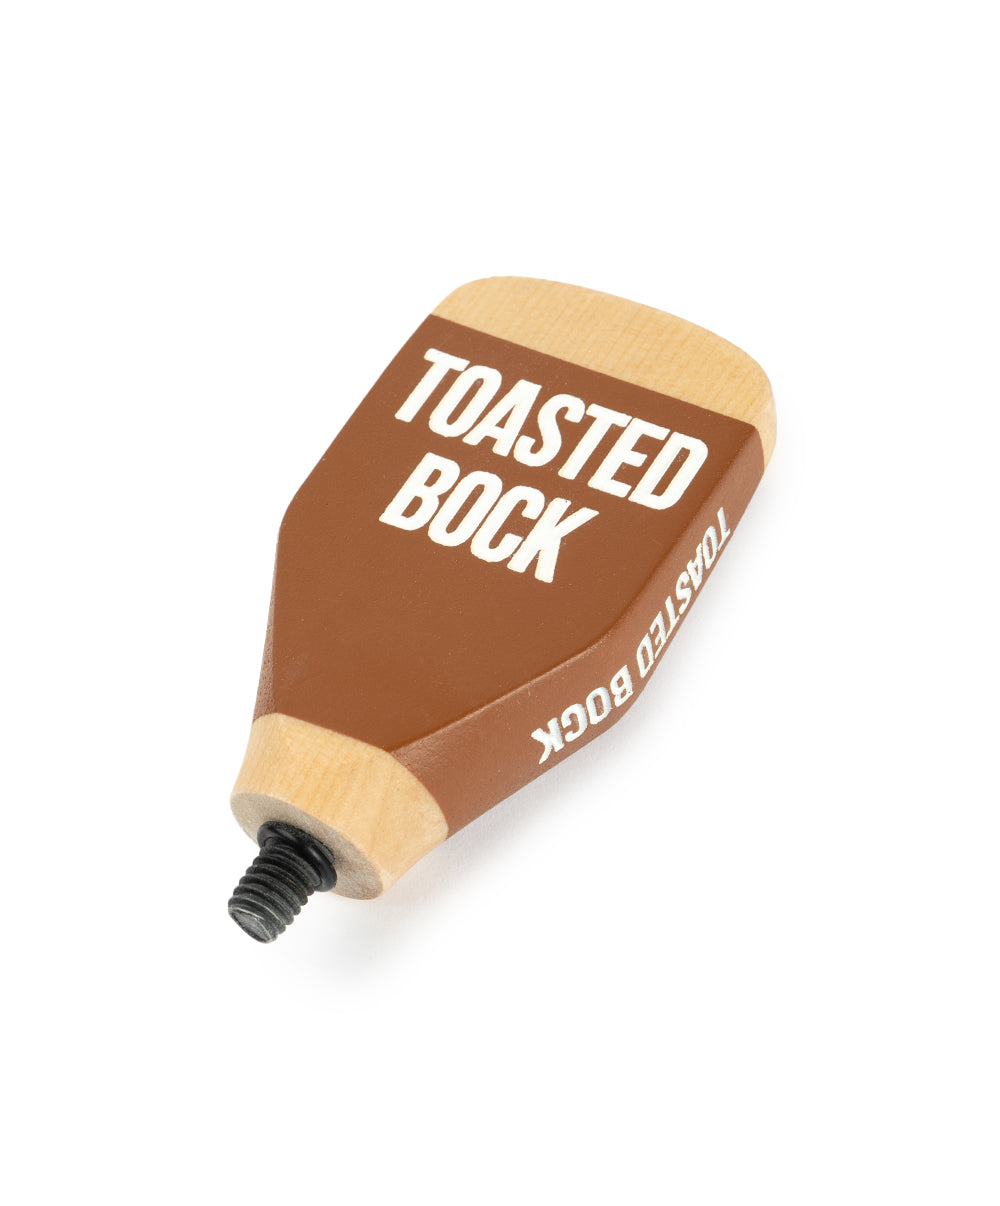 TOASTED BOCK TAP TOP